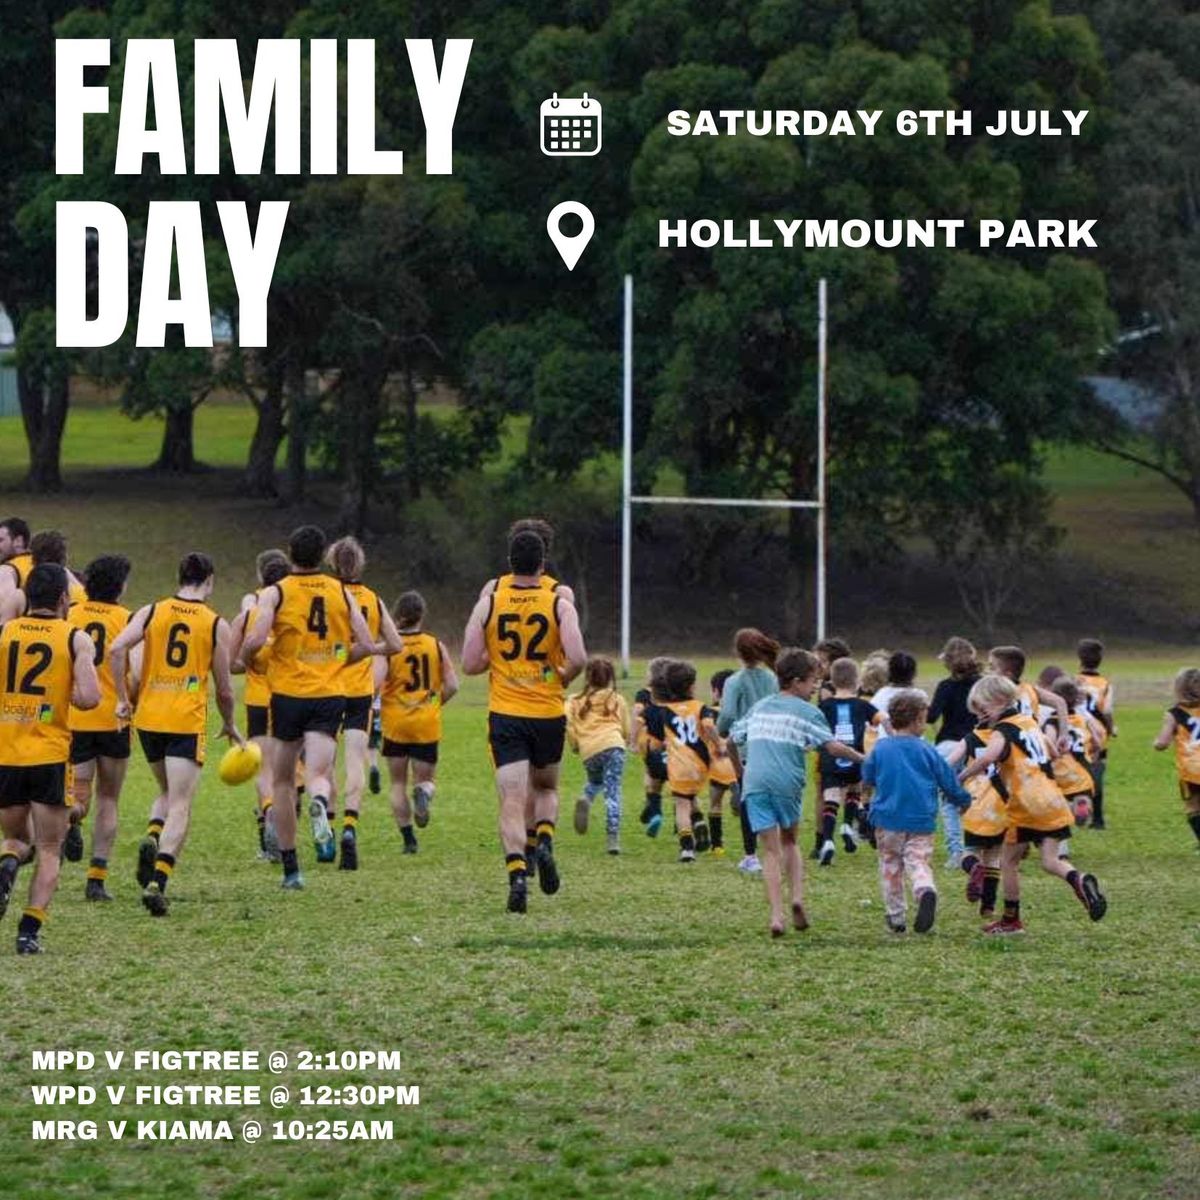 TIGERS FAMILY DAY